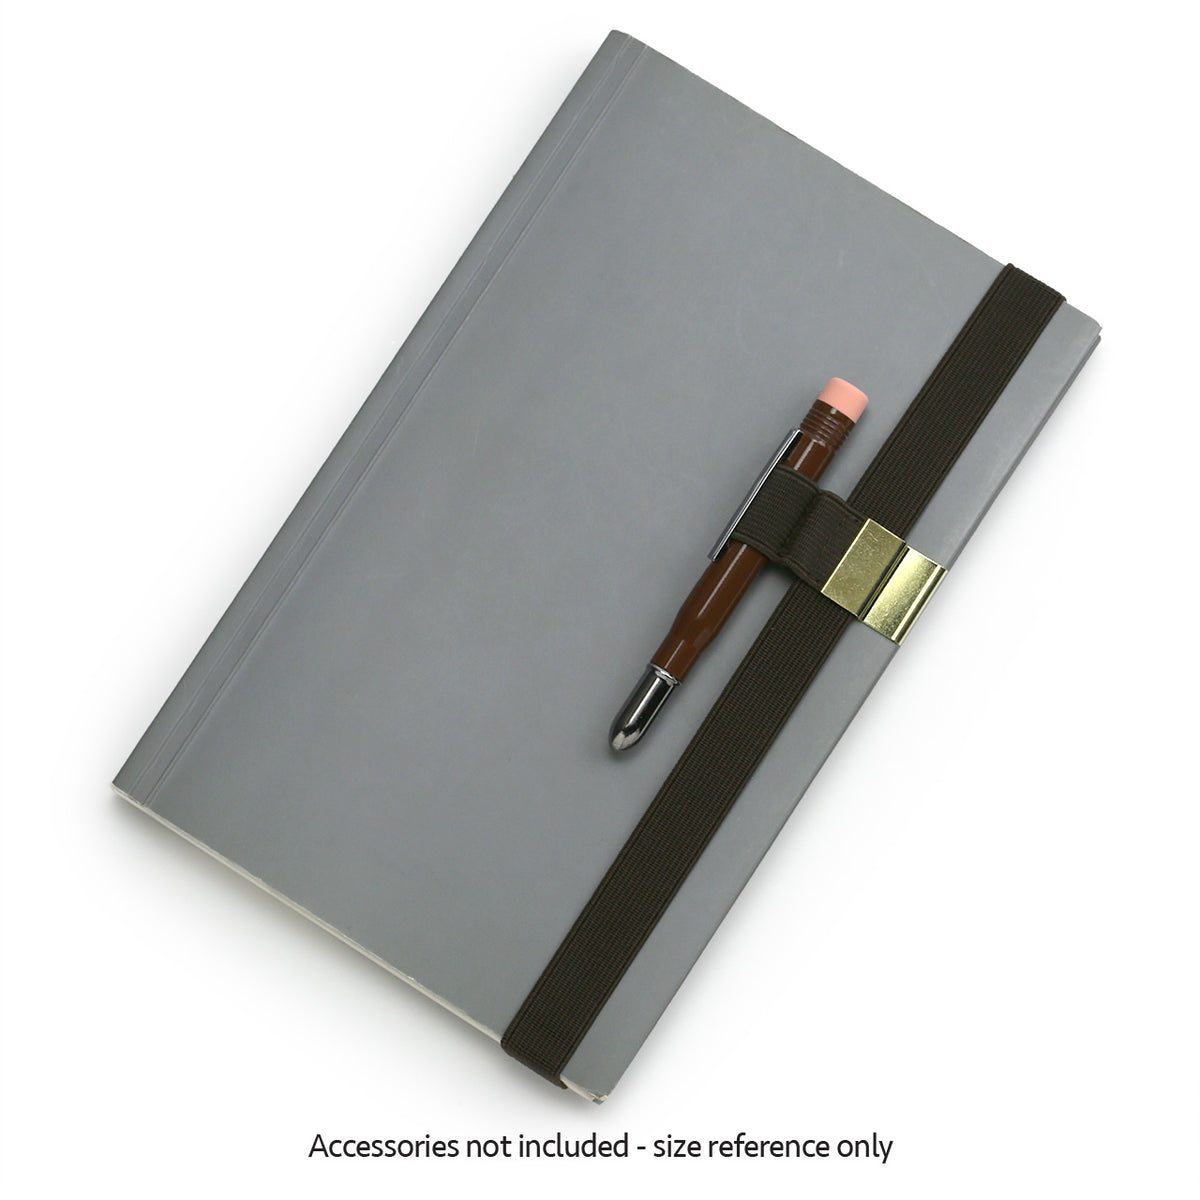 Brown penholder band with brass clip shown in use on a book with a pencil for size reference